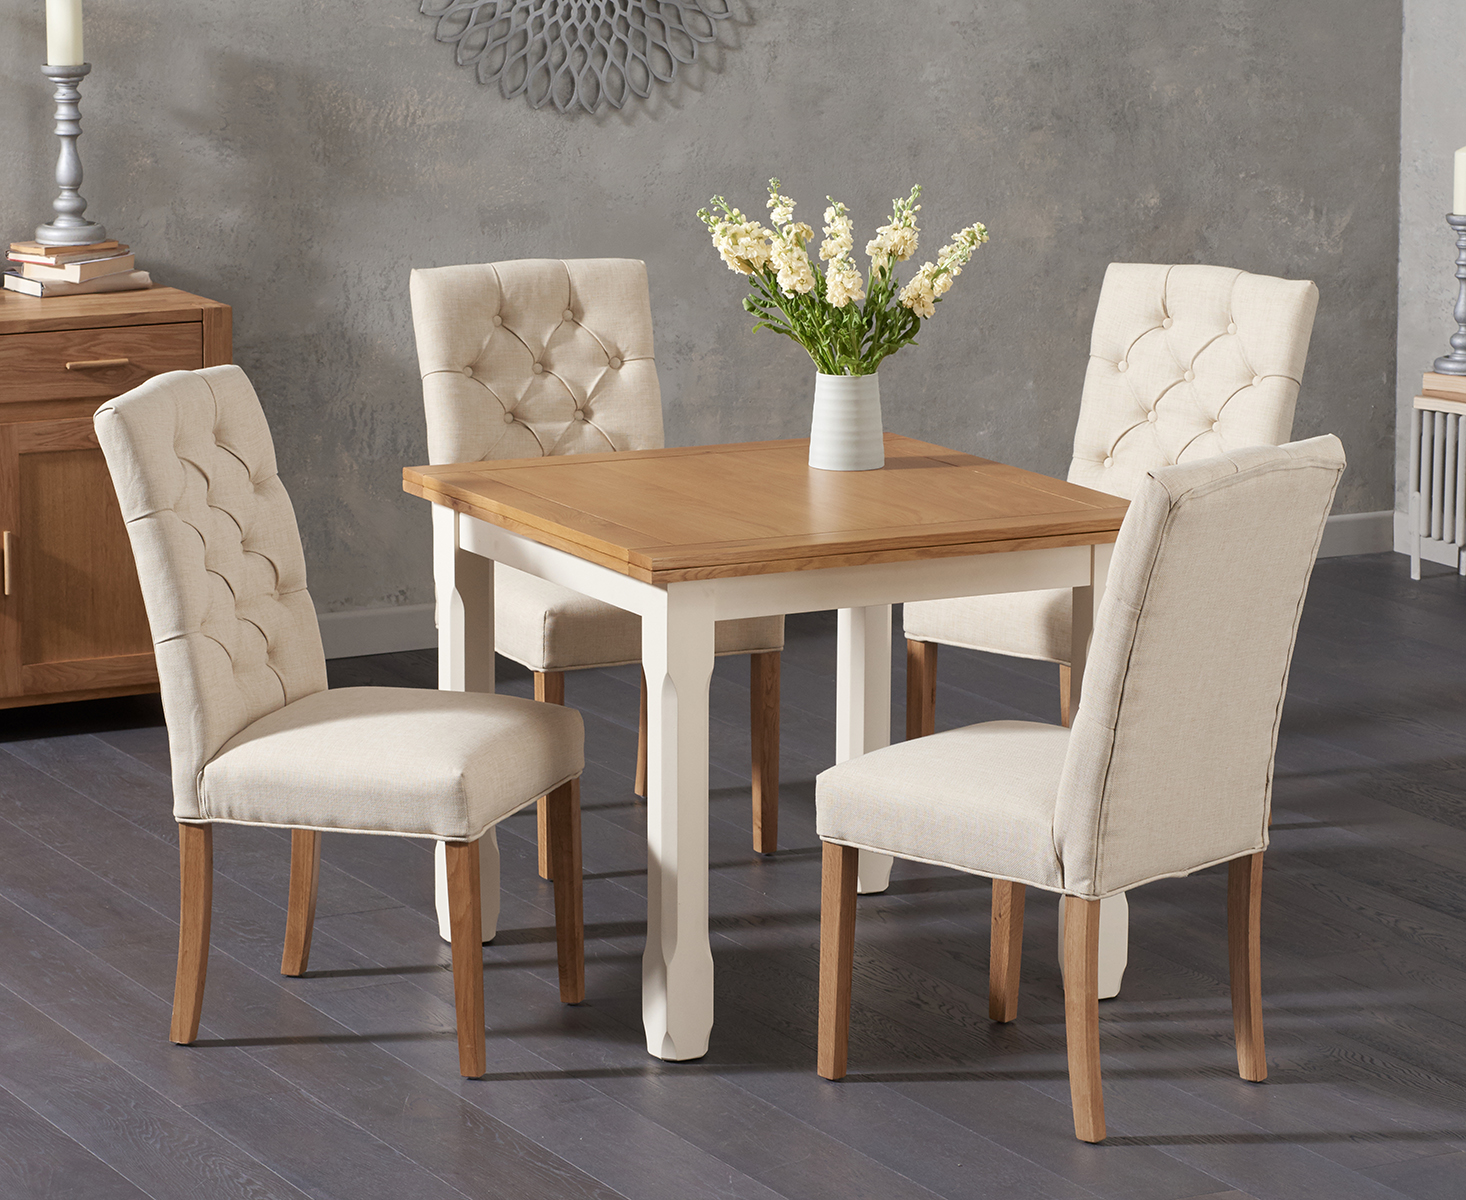 Somerset 90cm Flip Top Oak And Cream Painted Dining Table With 8 Cream Isabella Cream Fabric Chairs